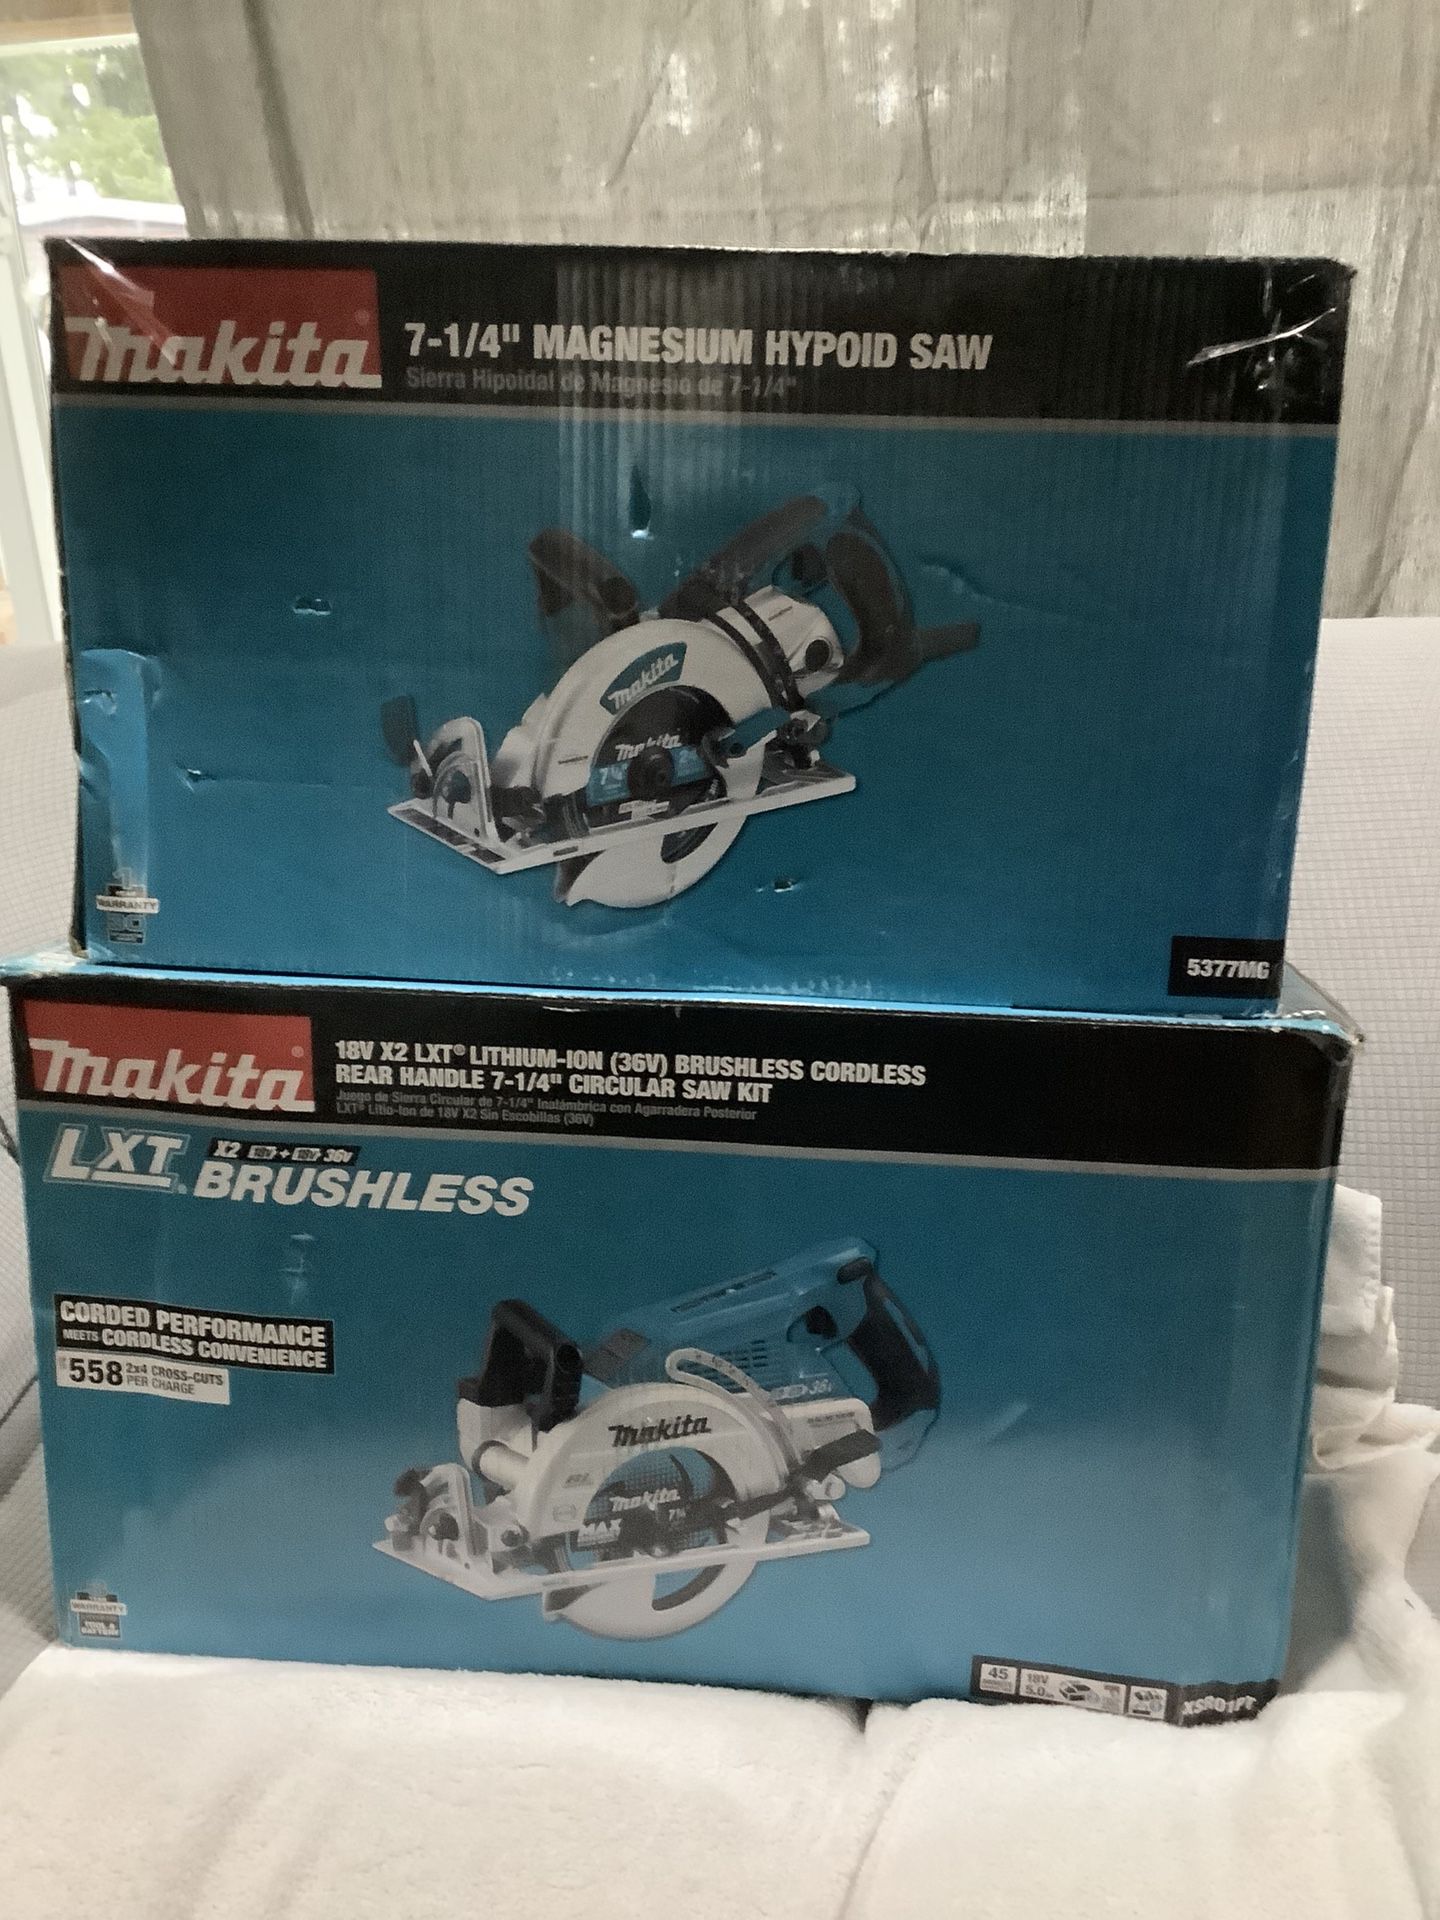 Makita Brand New Saw for Sale in Portland, OR OfferUp